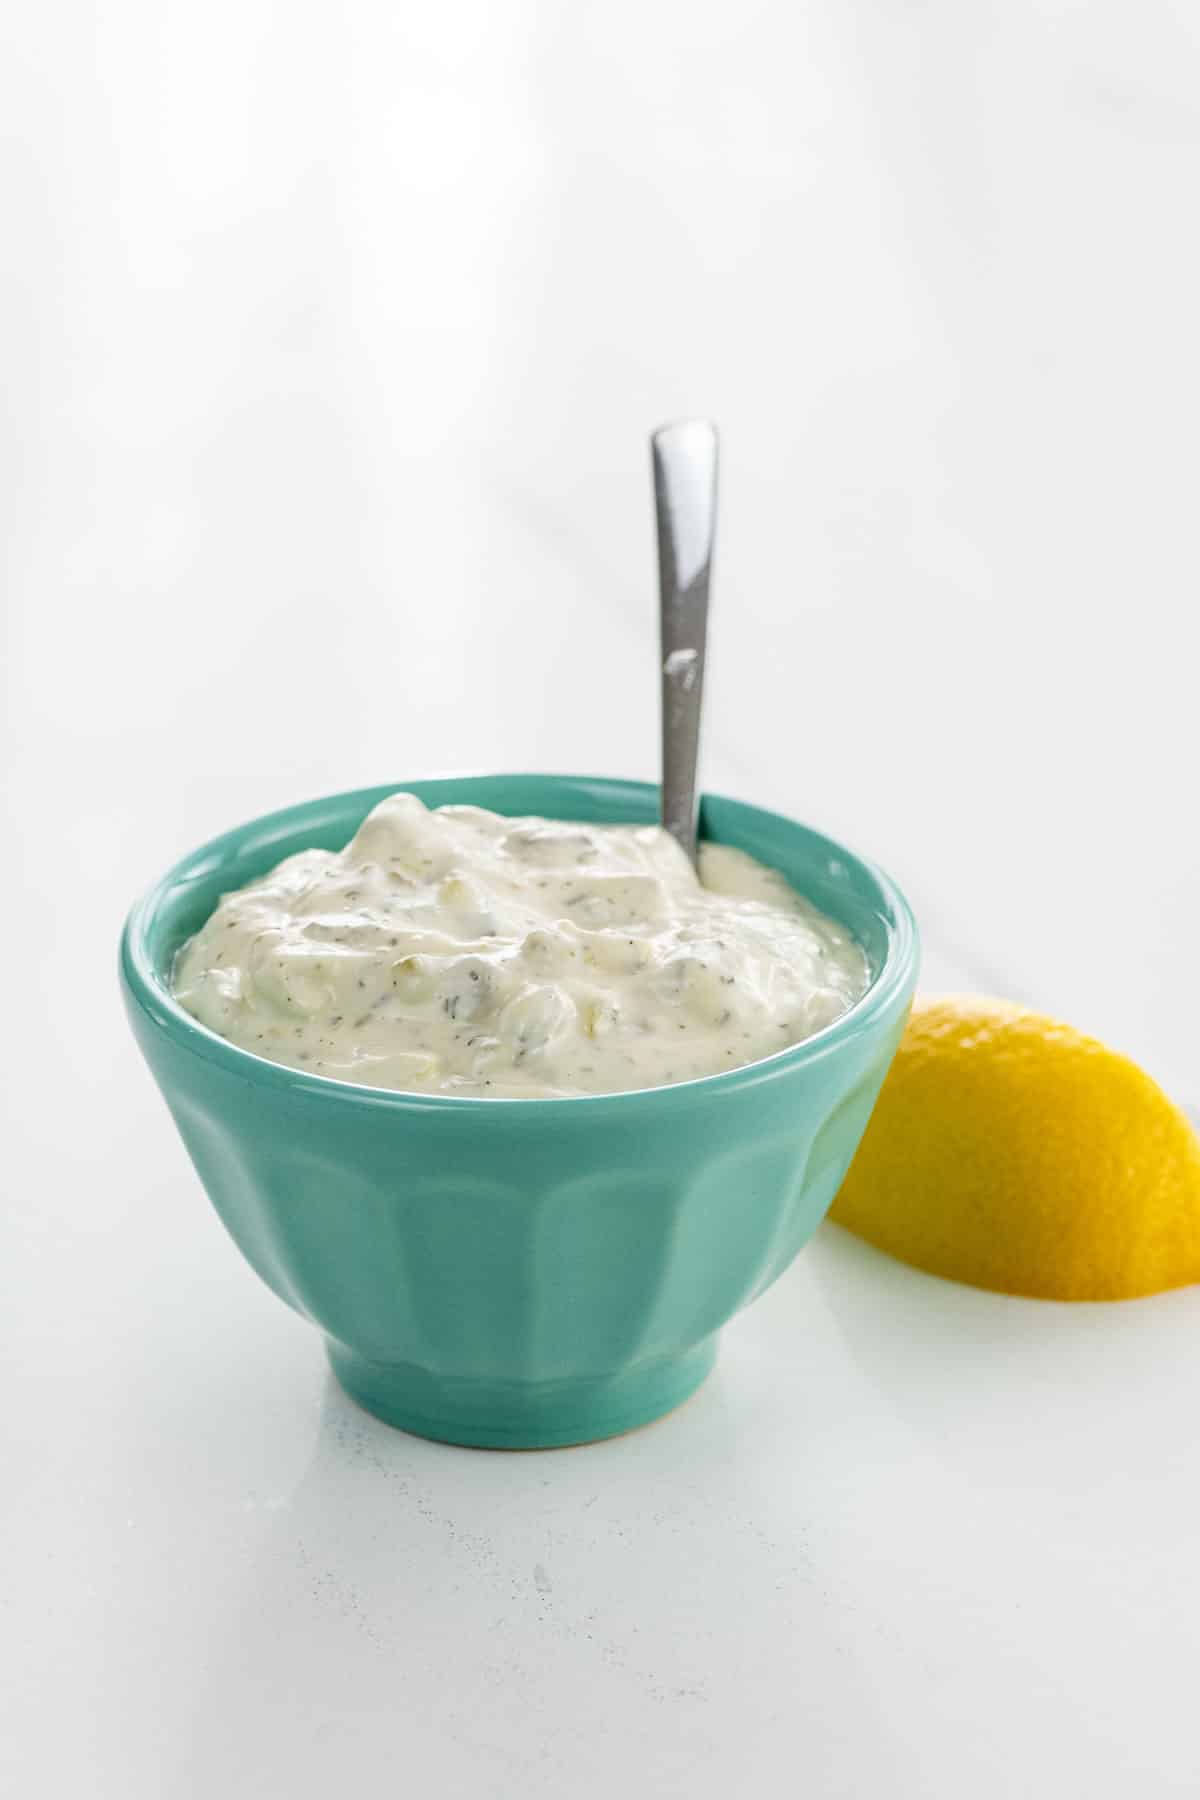 tartar sauce for crab cakes, fish, oysters, and more in a small bowl with a spoon and a lemon wedge